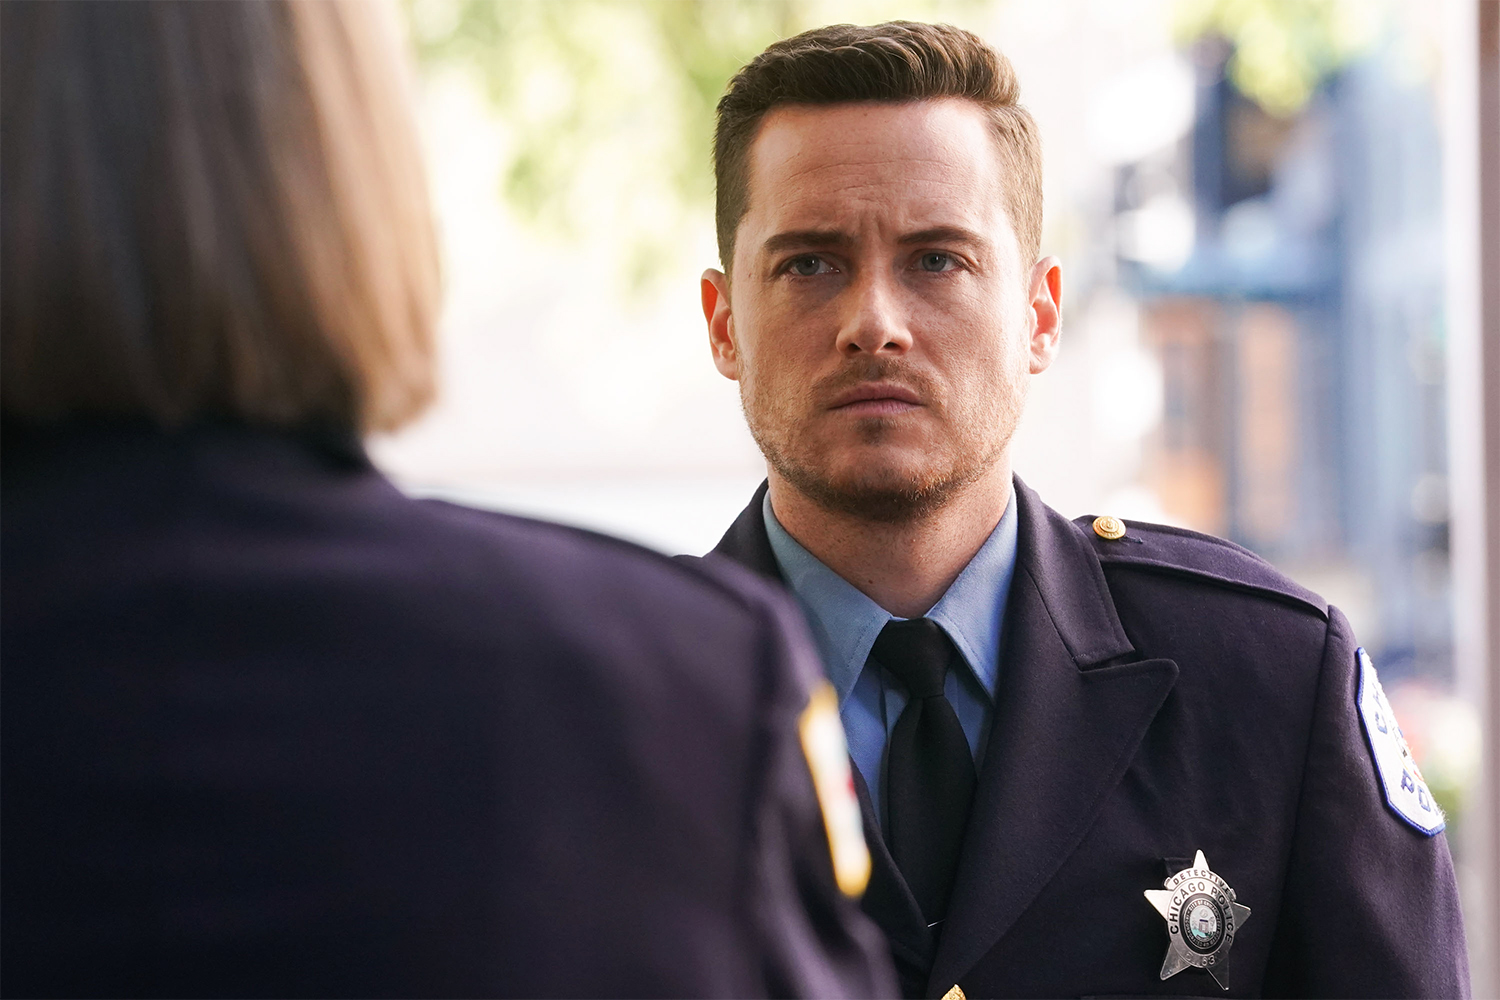 CHICAGO P.D. -- "A Good Man" Episode 1003 -- Pictured: Jesse Lee Soffer as Jay Halstead -- (Photo by: Lori Allen/NBC)